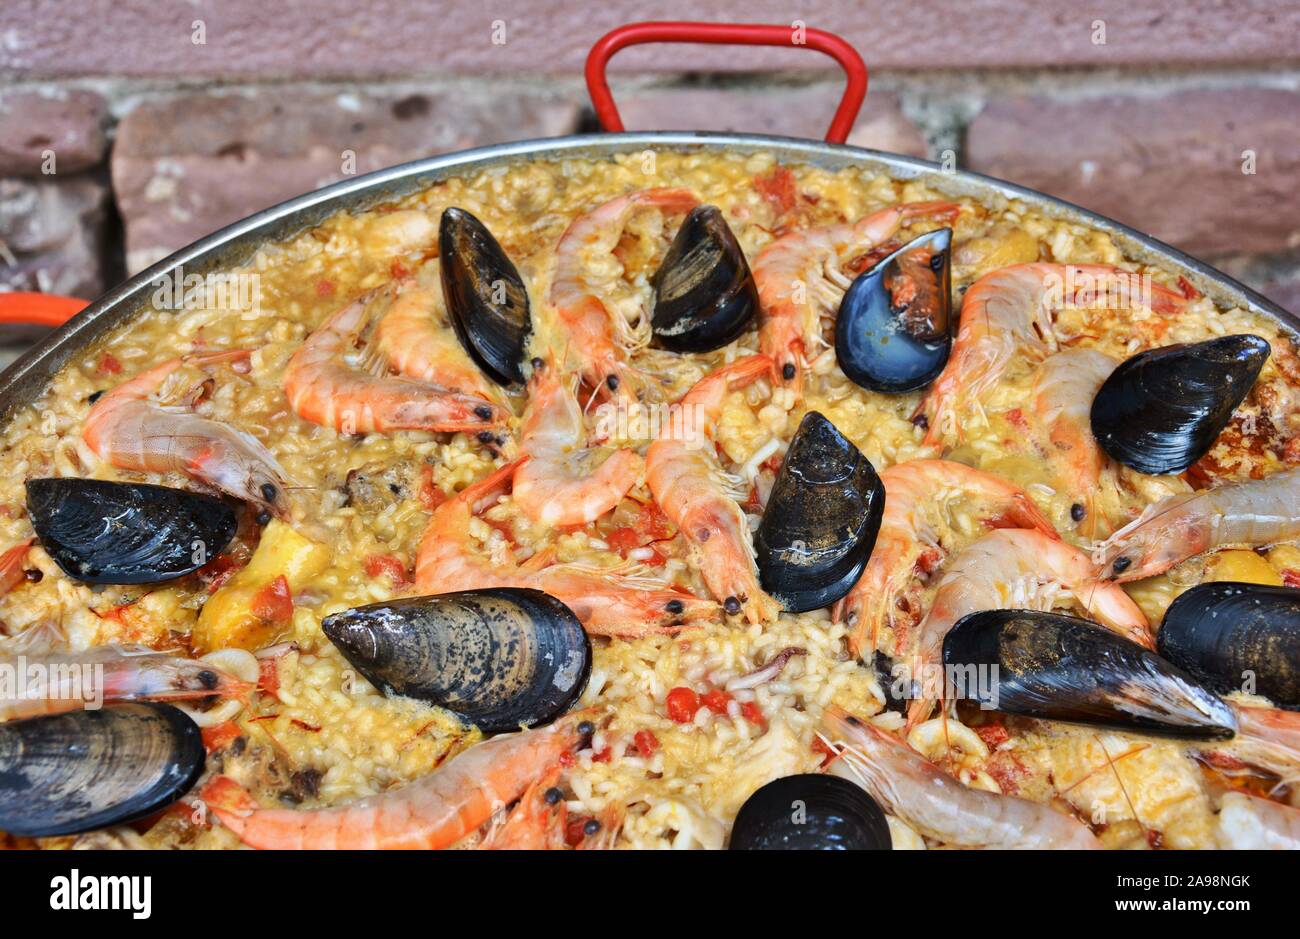 delicious Spanish paella with seafood Stock Photo